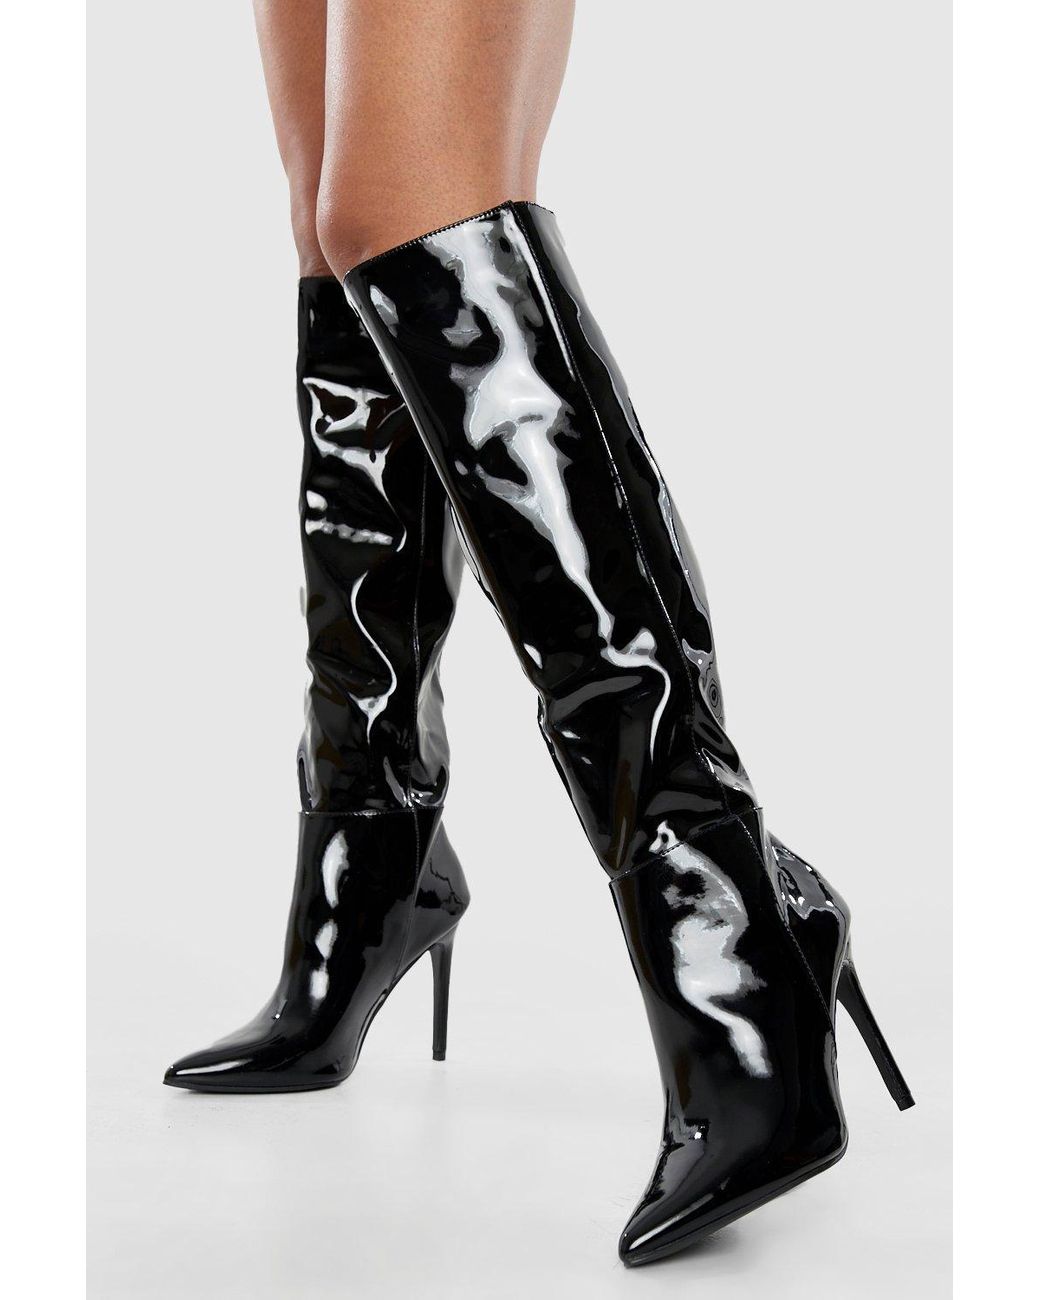 Boohoo Pointed Knee High Stiletto Heeled Boots in Black | Lyst